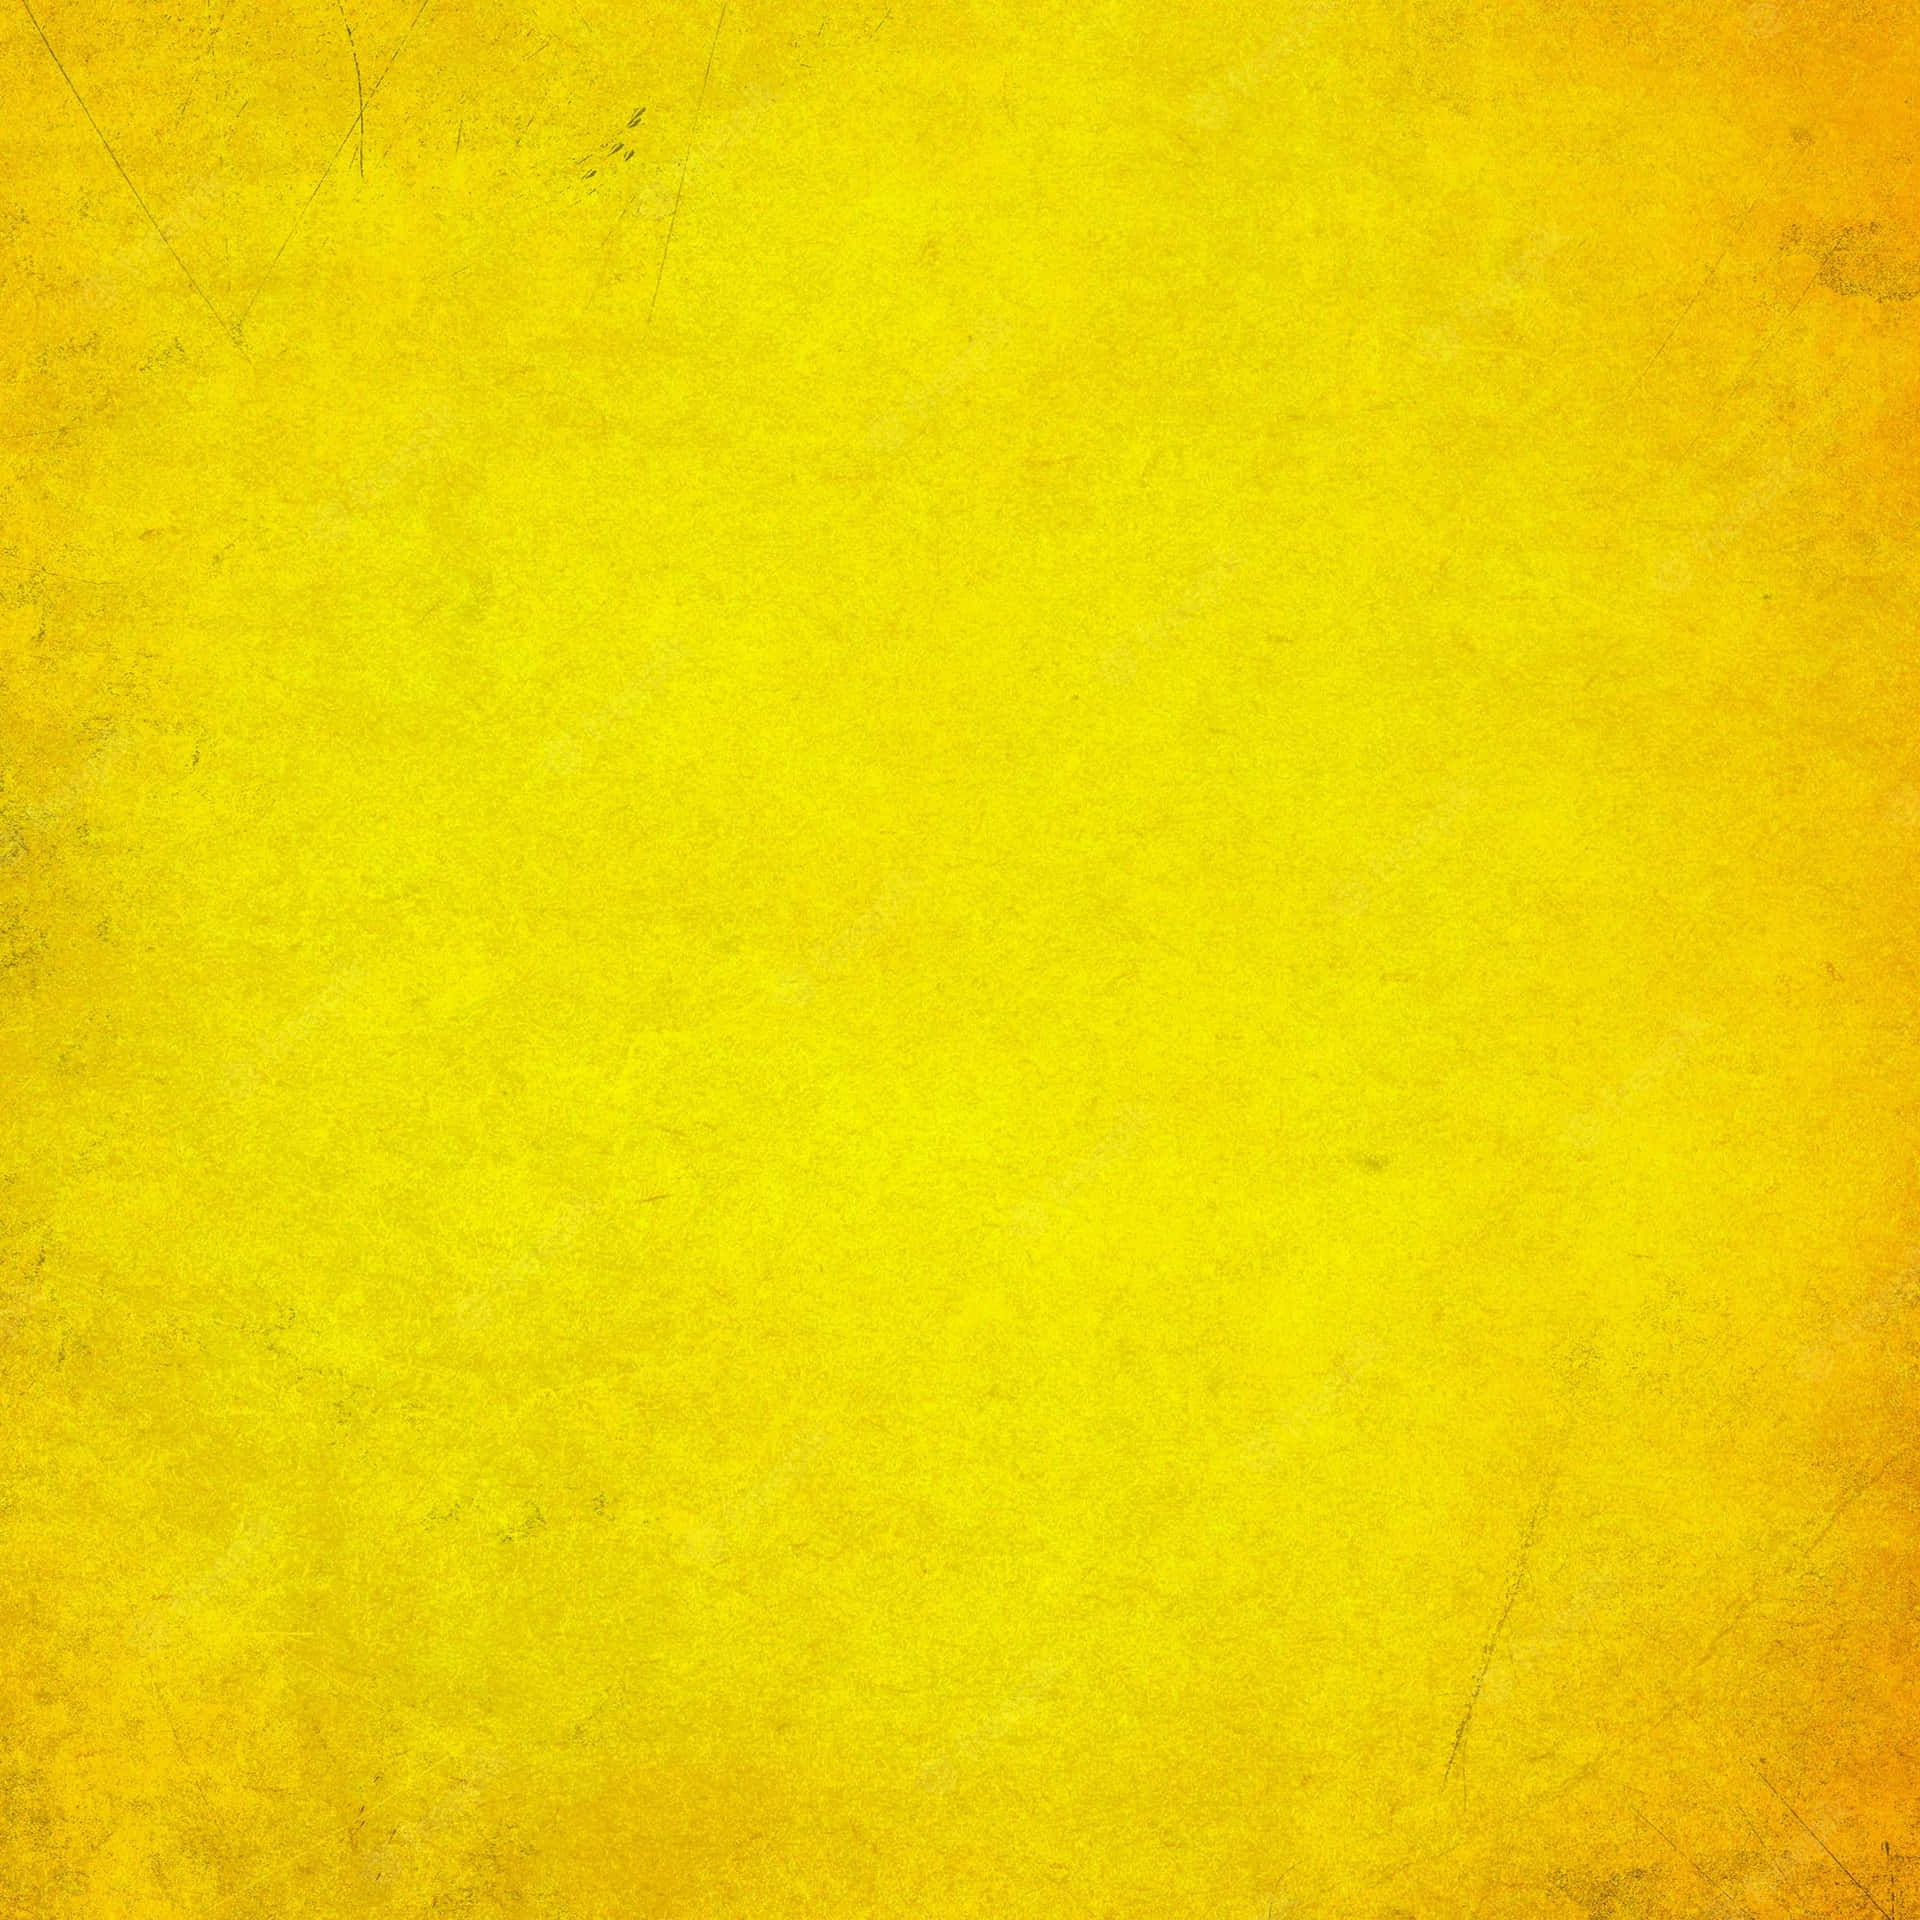 Yellow Grunge Texture Wallpapers